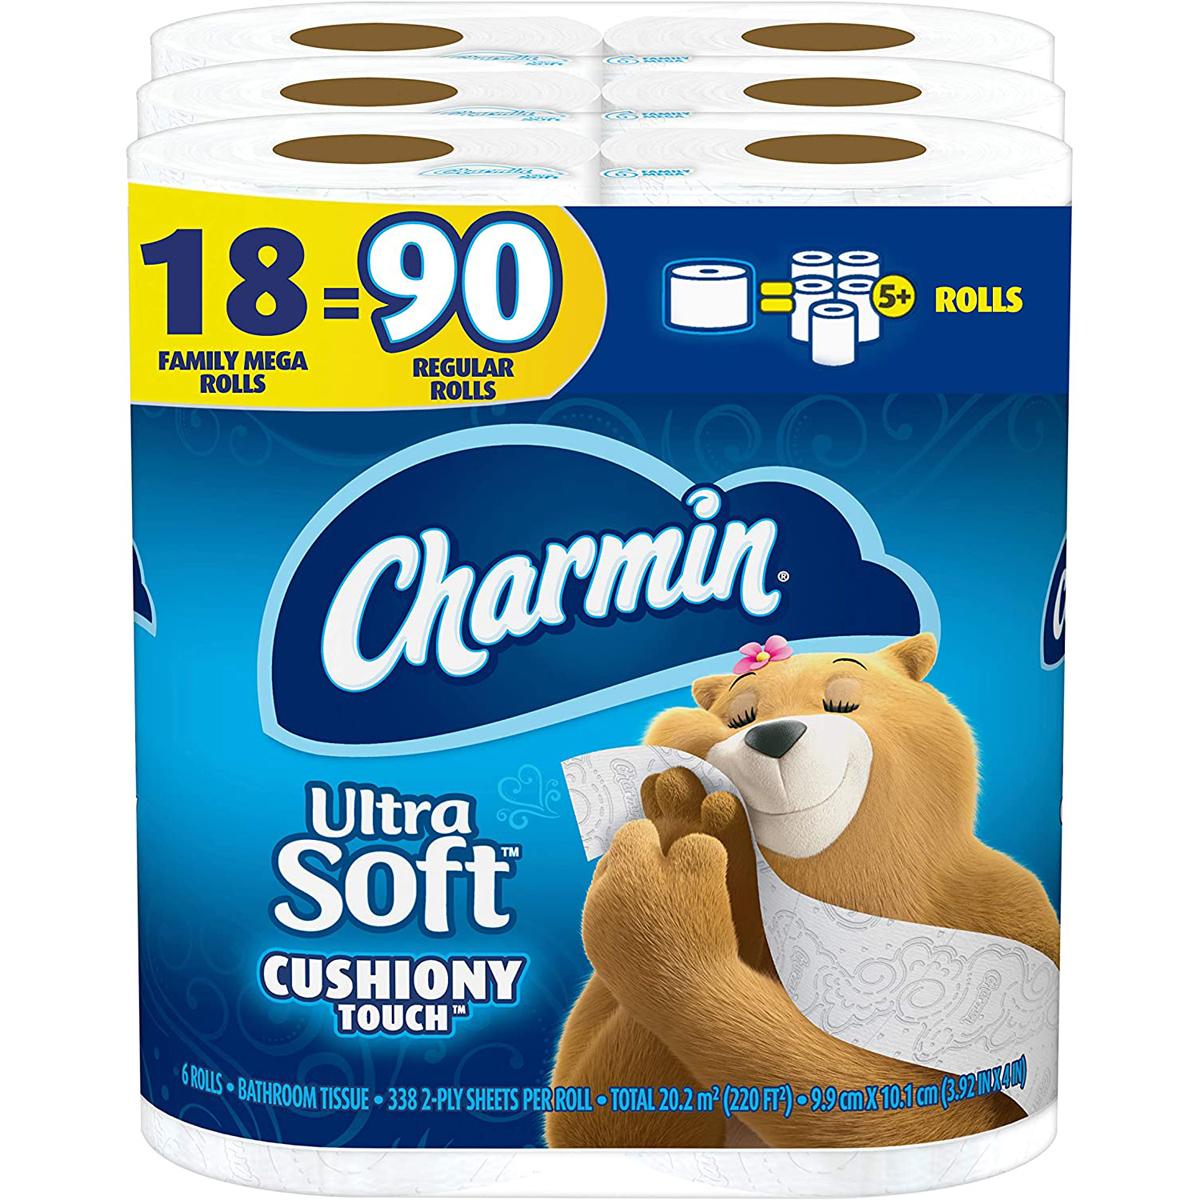 18 Charmin Ultra Soft Touch Family Mega Rolls Toilet Paper for $19.04 Shipped